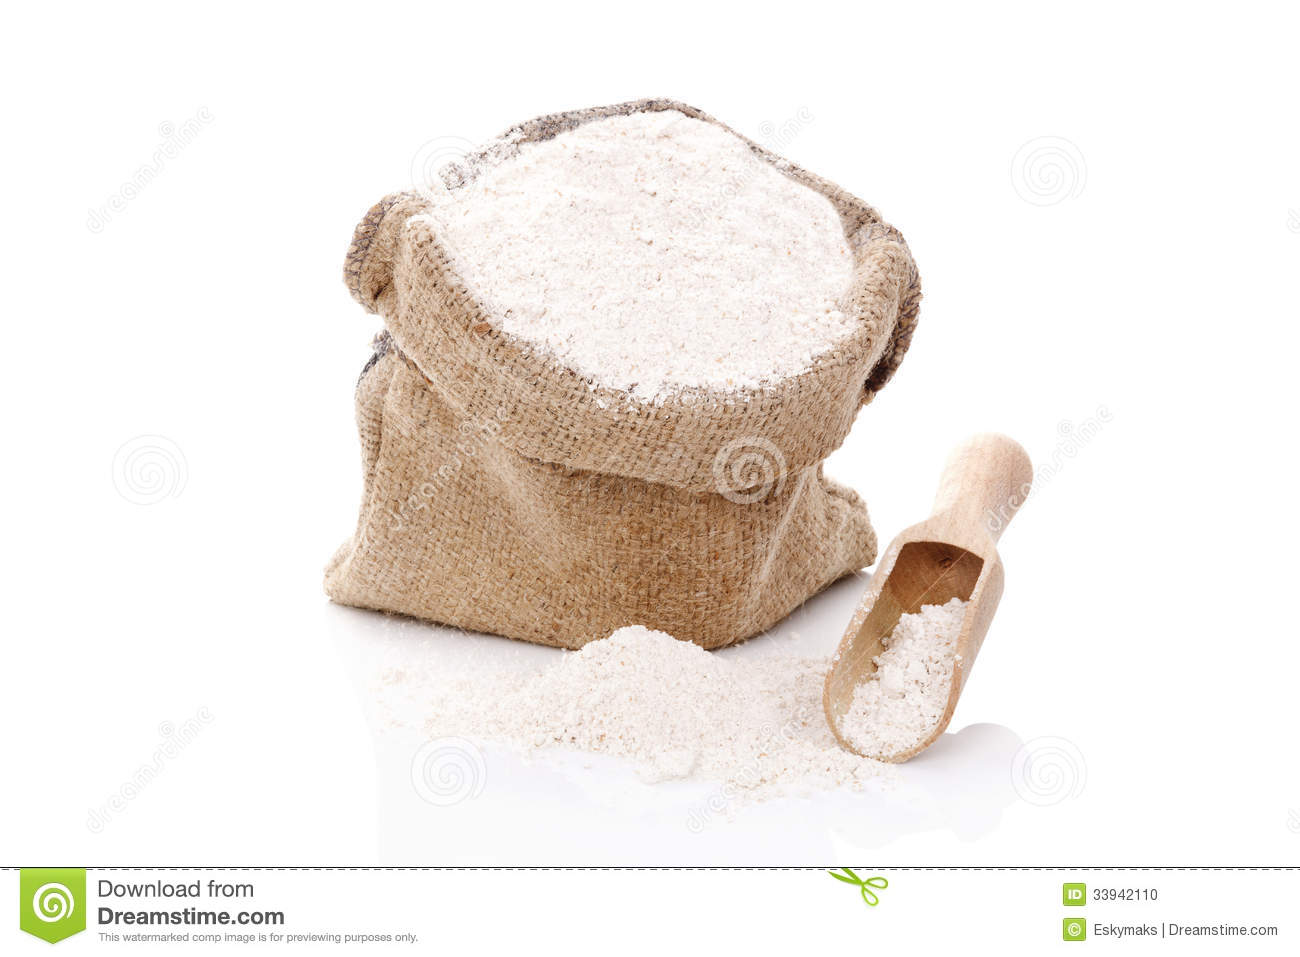 White Flour In Brown Burlap Bag With Wooden Scoop On White Background 